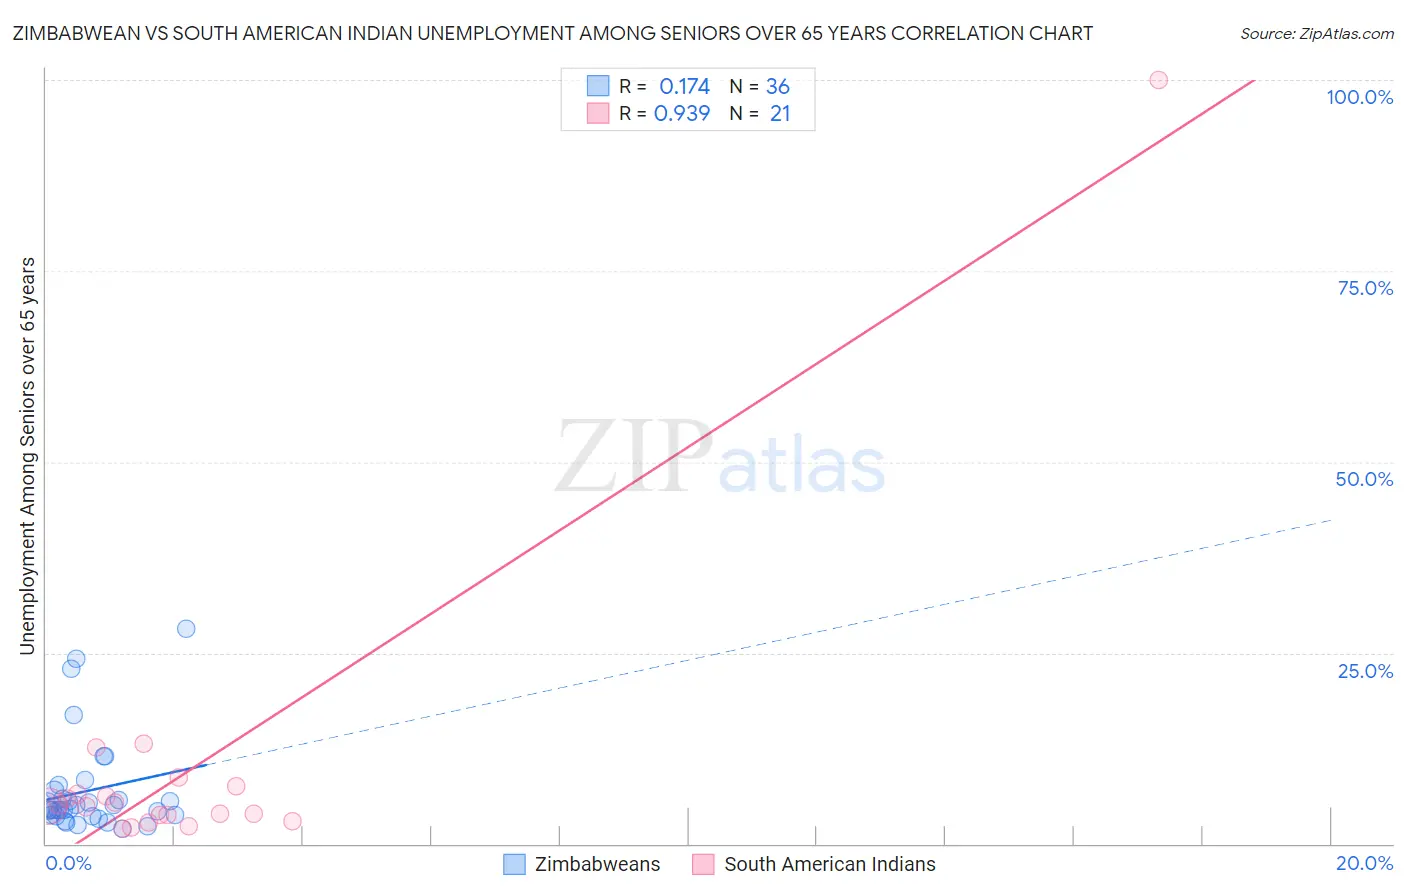 Zimbabwean vs South American Indian Unemployment Among Seniors over 65 years